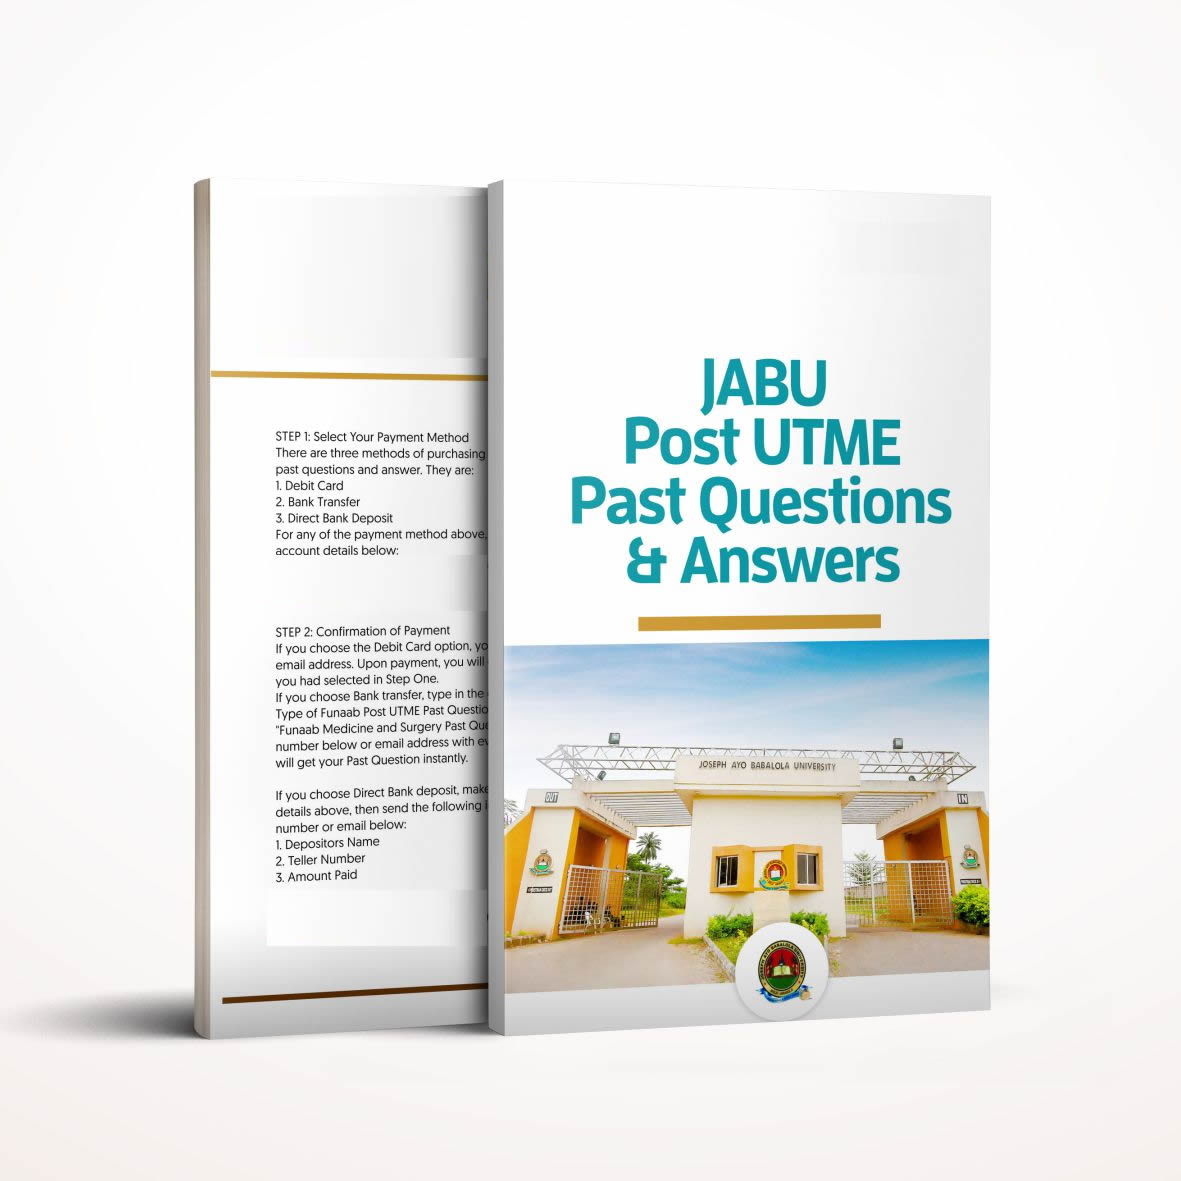 jabu post utme past questions and answers - Pdf